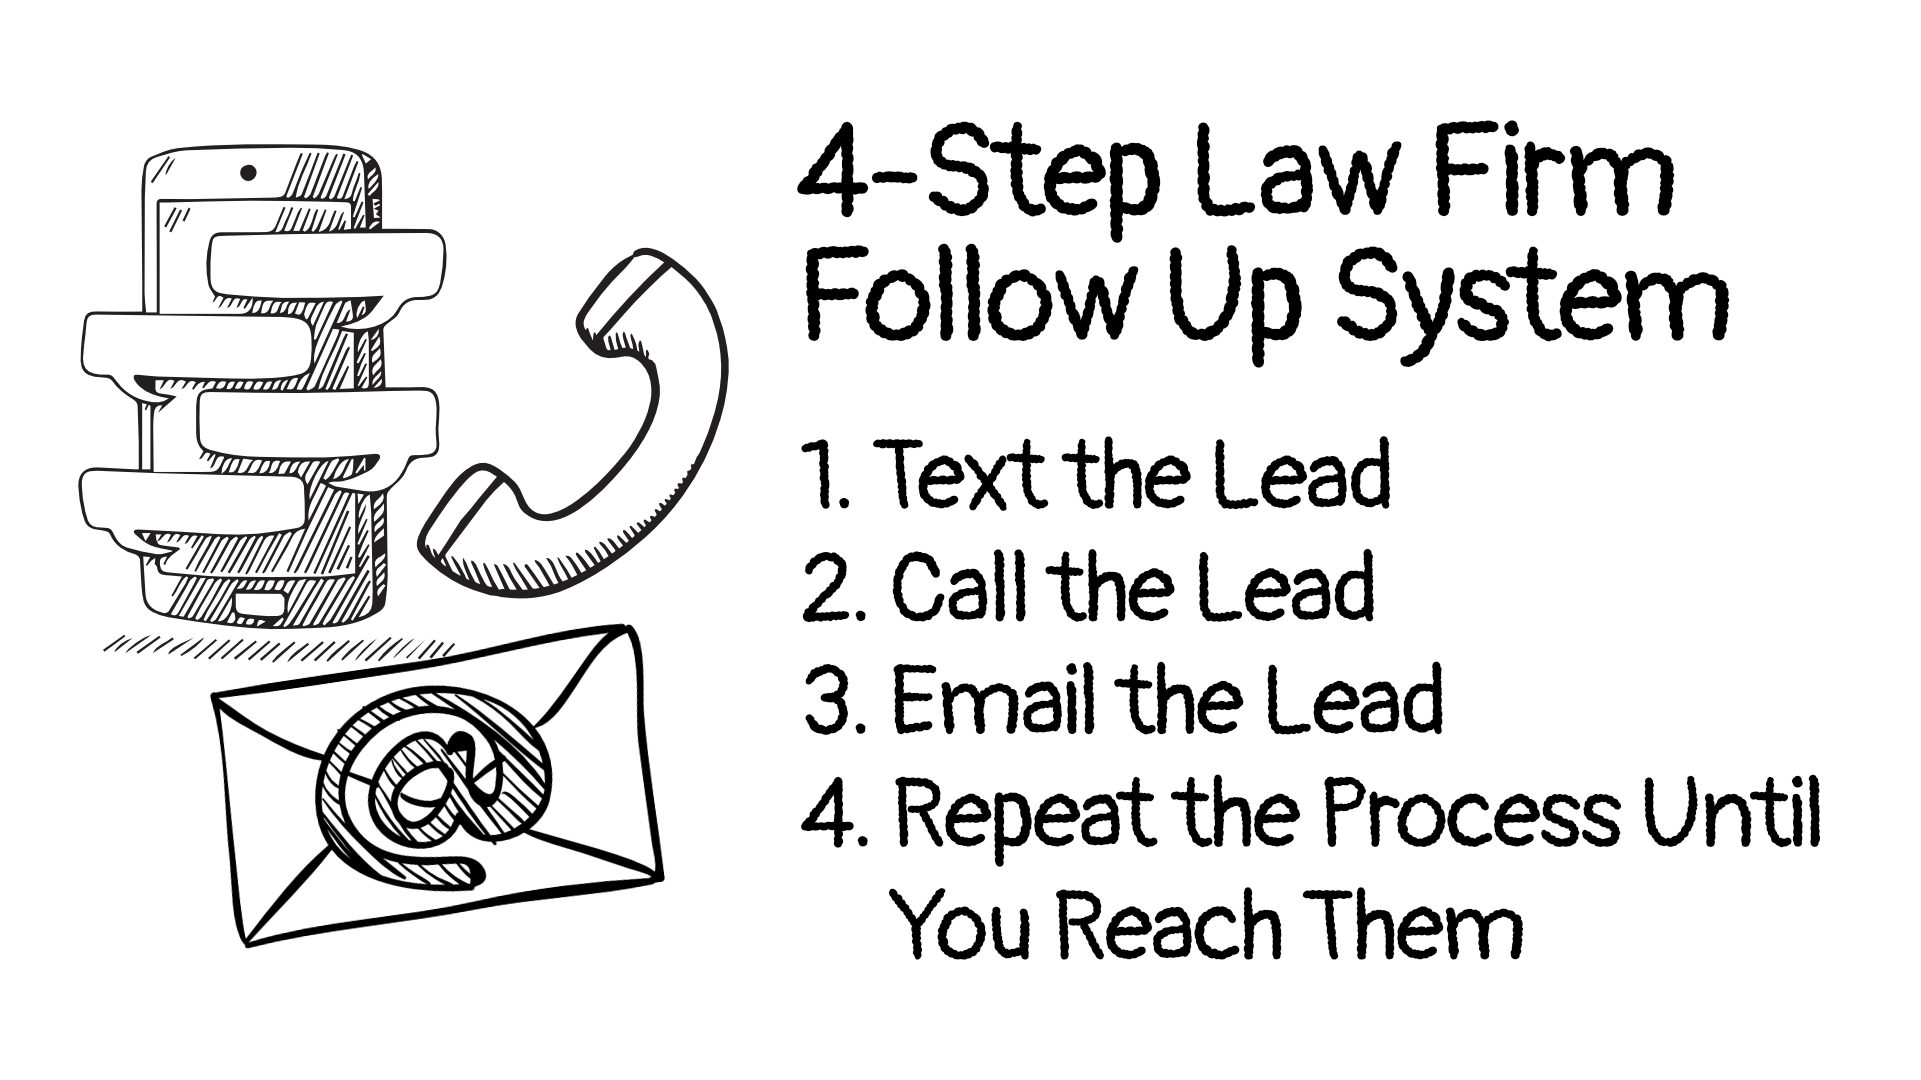 How To Train Your Intake Specialist To Close More Leads for Your Law Firm